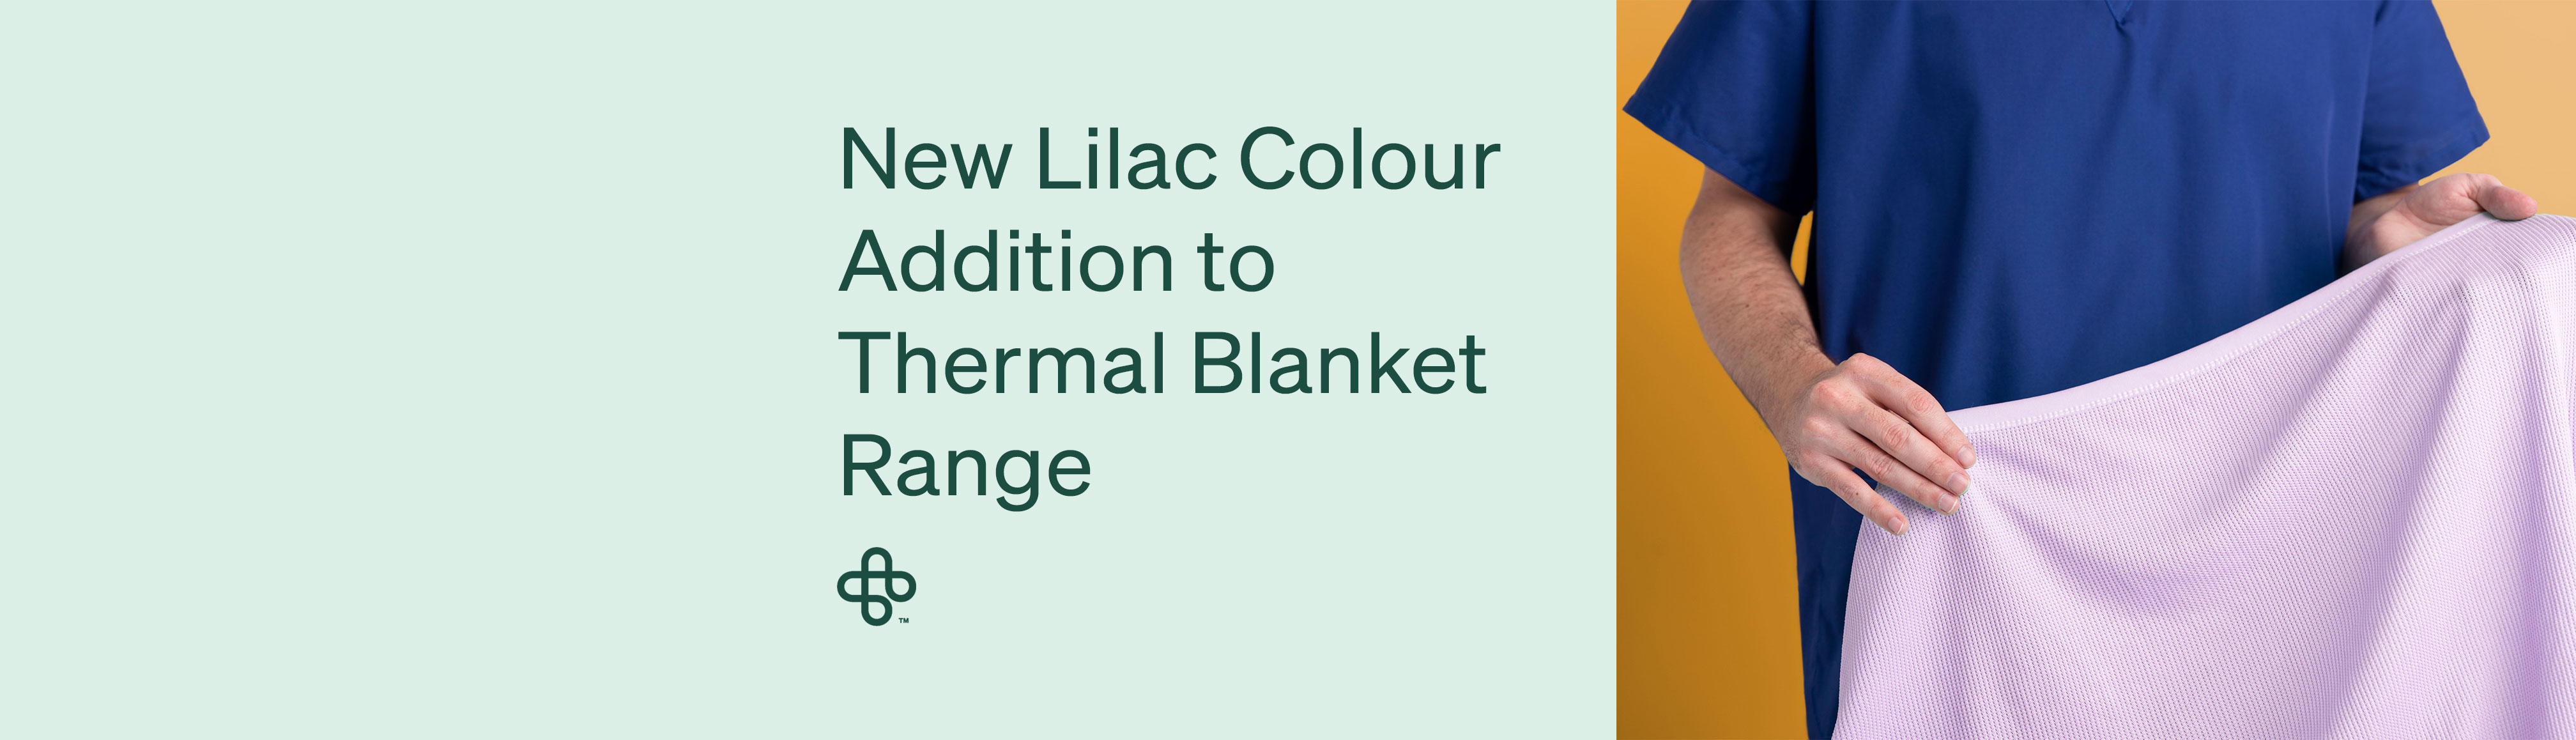 New Lilac Colour Addition to Thermal Blanket Range Blog